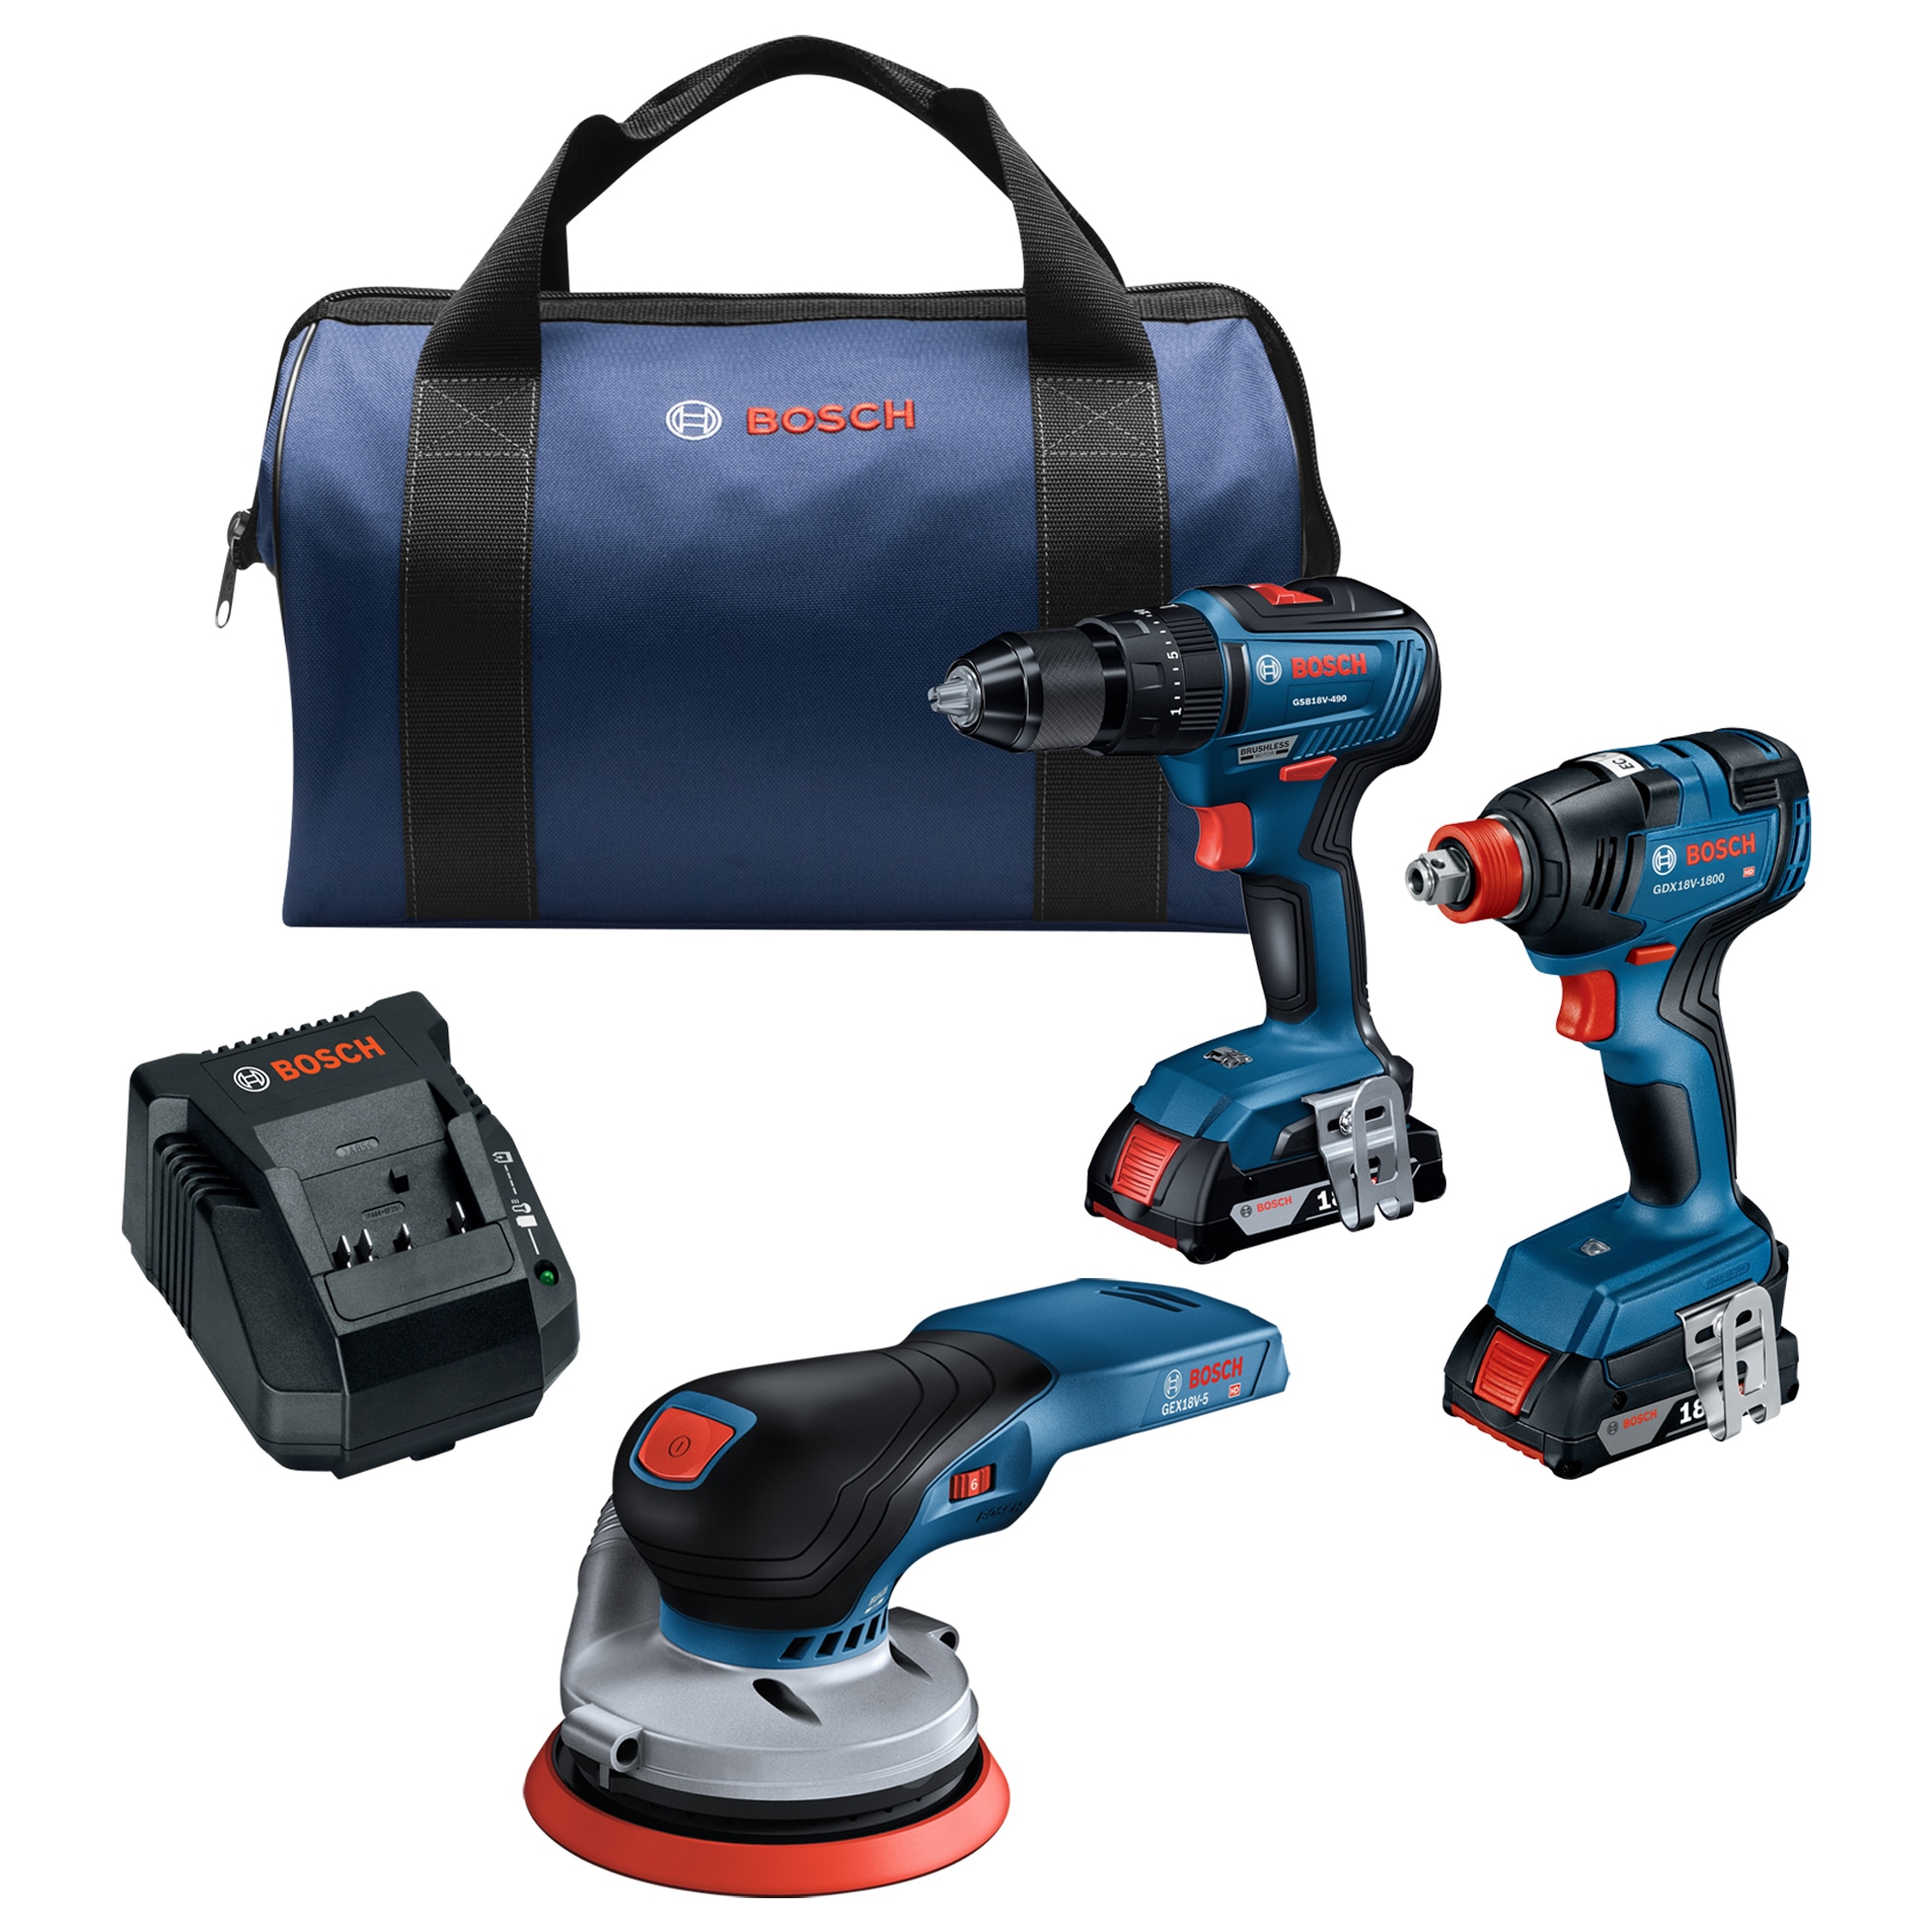 Bosch 18V Brushless 3-Tool Kit w/ Hammer Drill/2-in1 Impact Driver/ Sander with 2x2.0ah Batteries, Charger and Bag